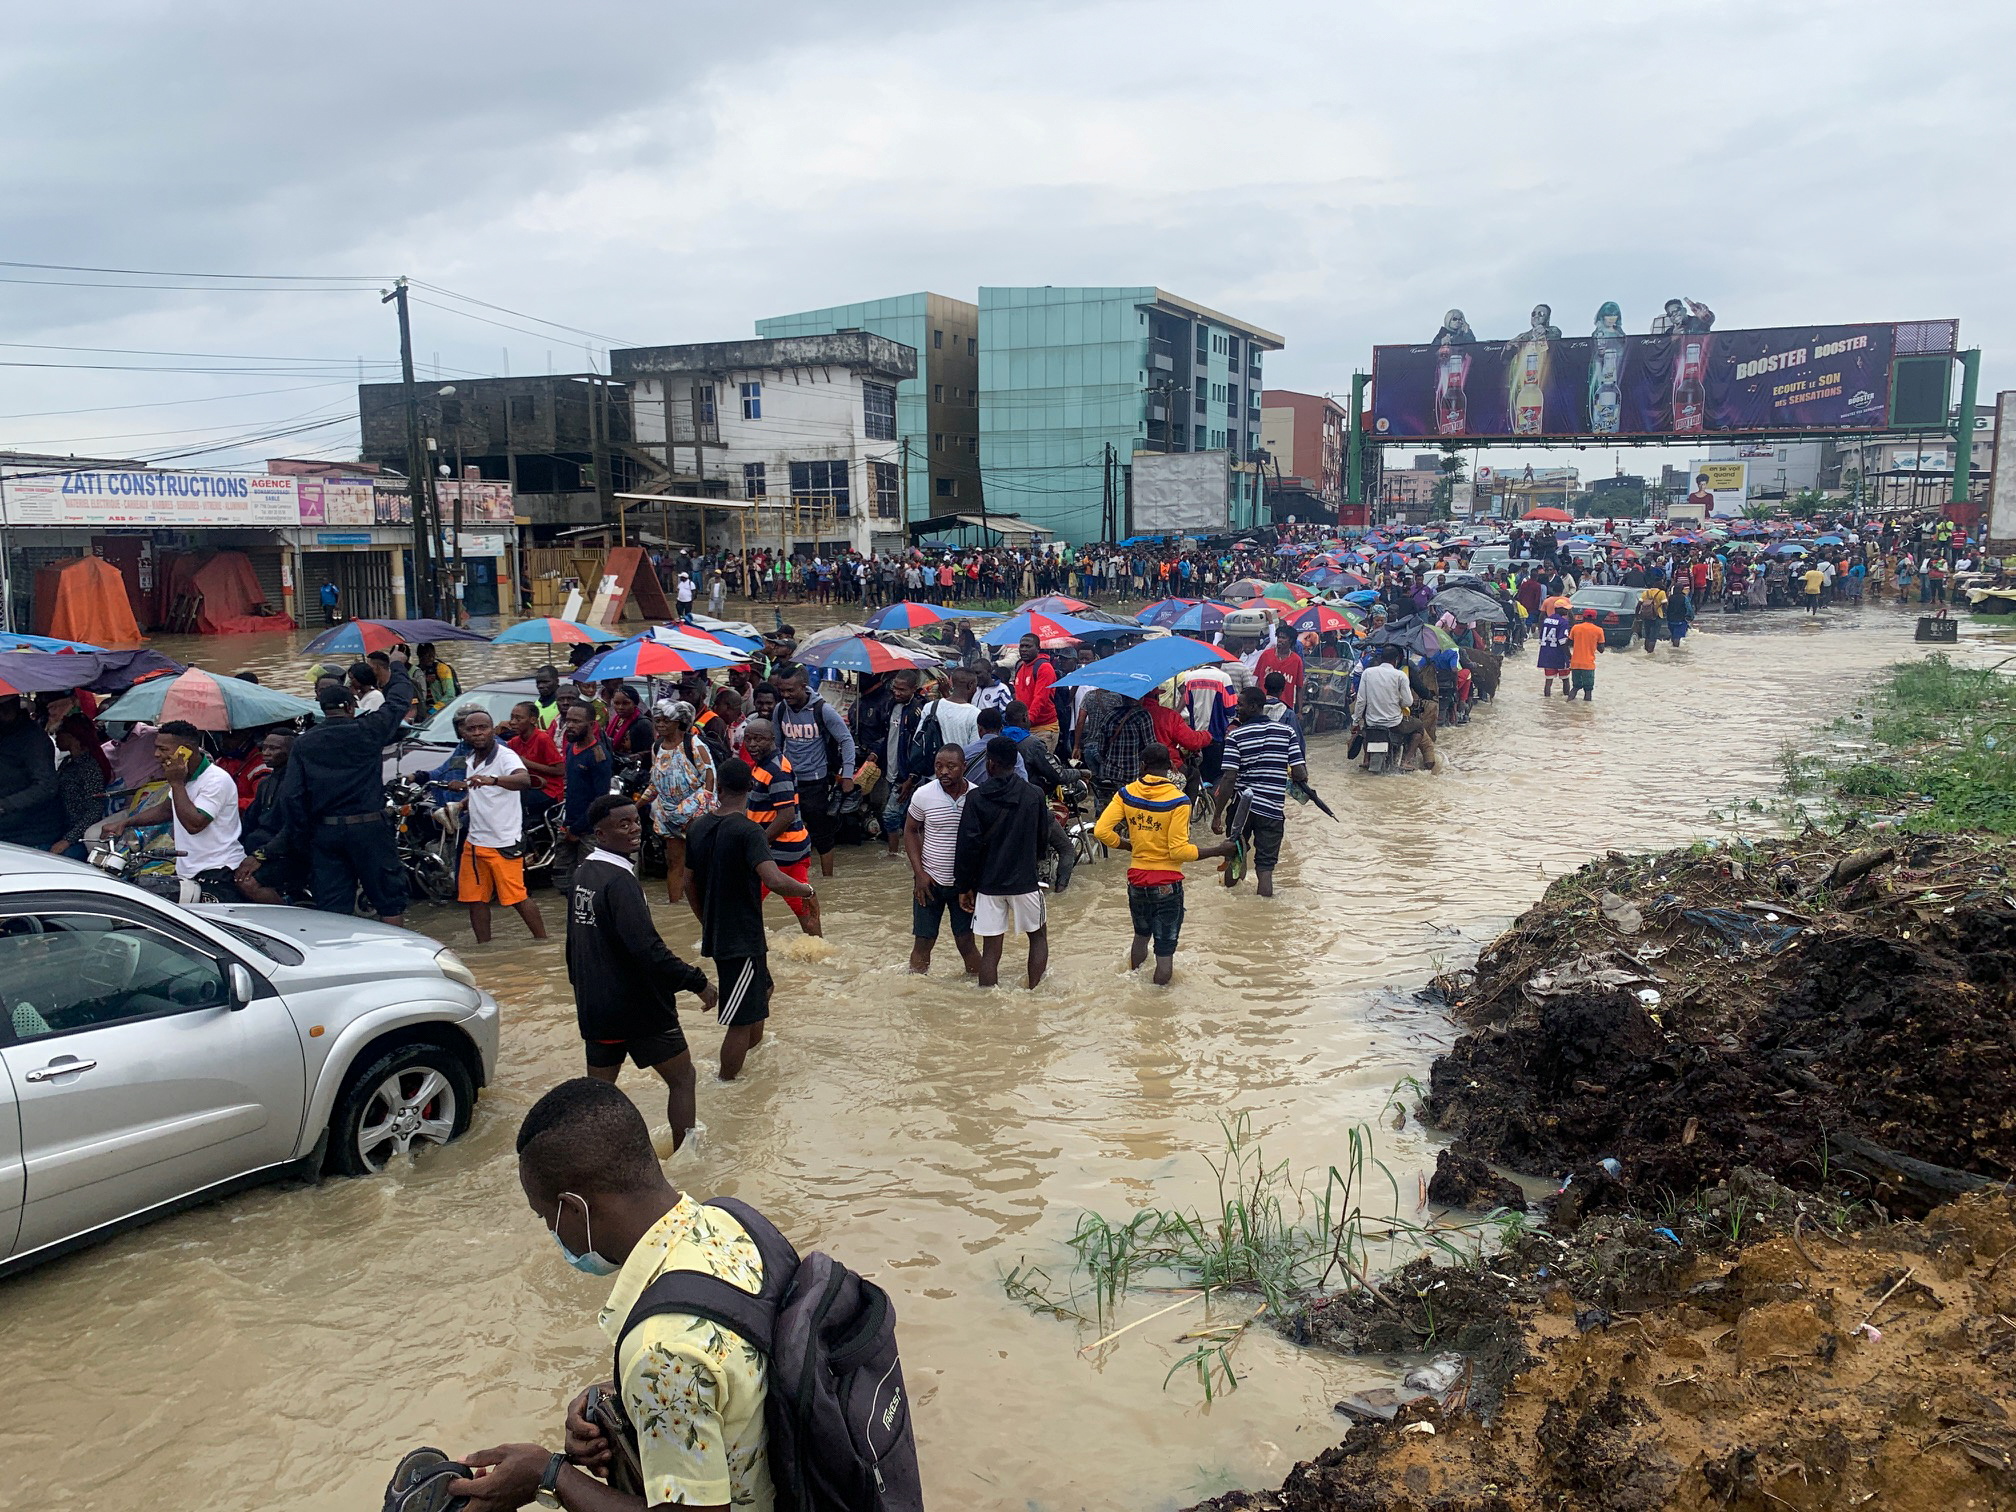 People make their way through a flooded street after the heavy rains in Douala